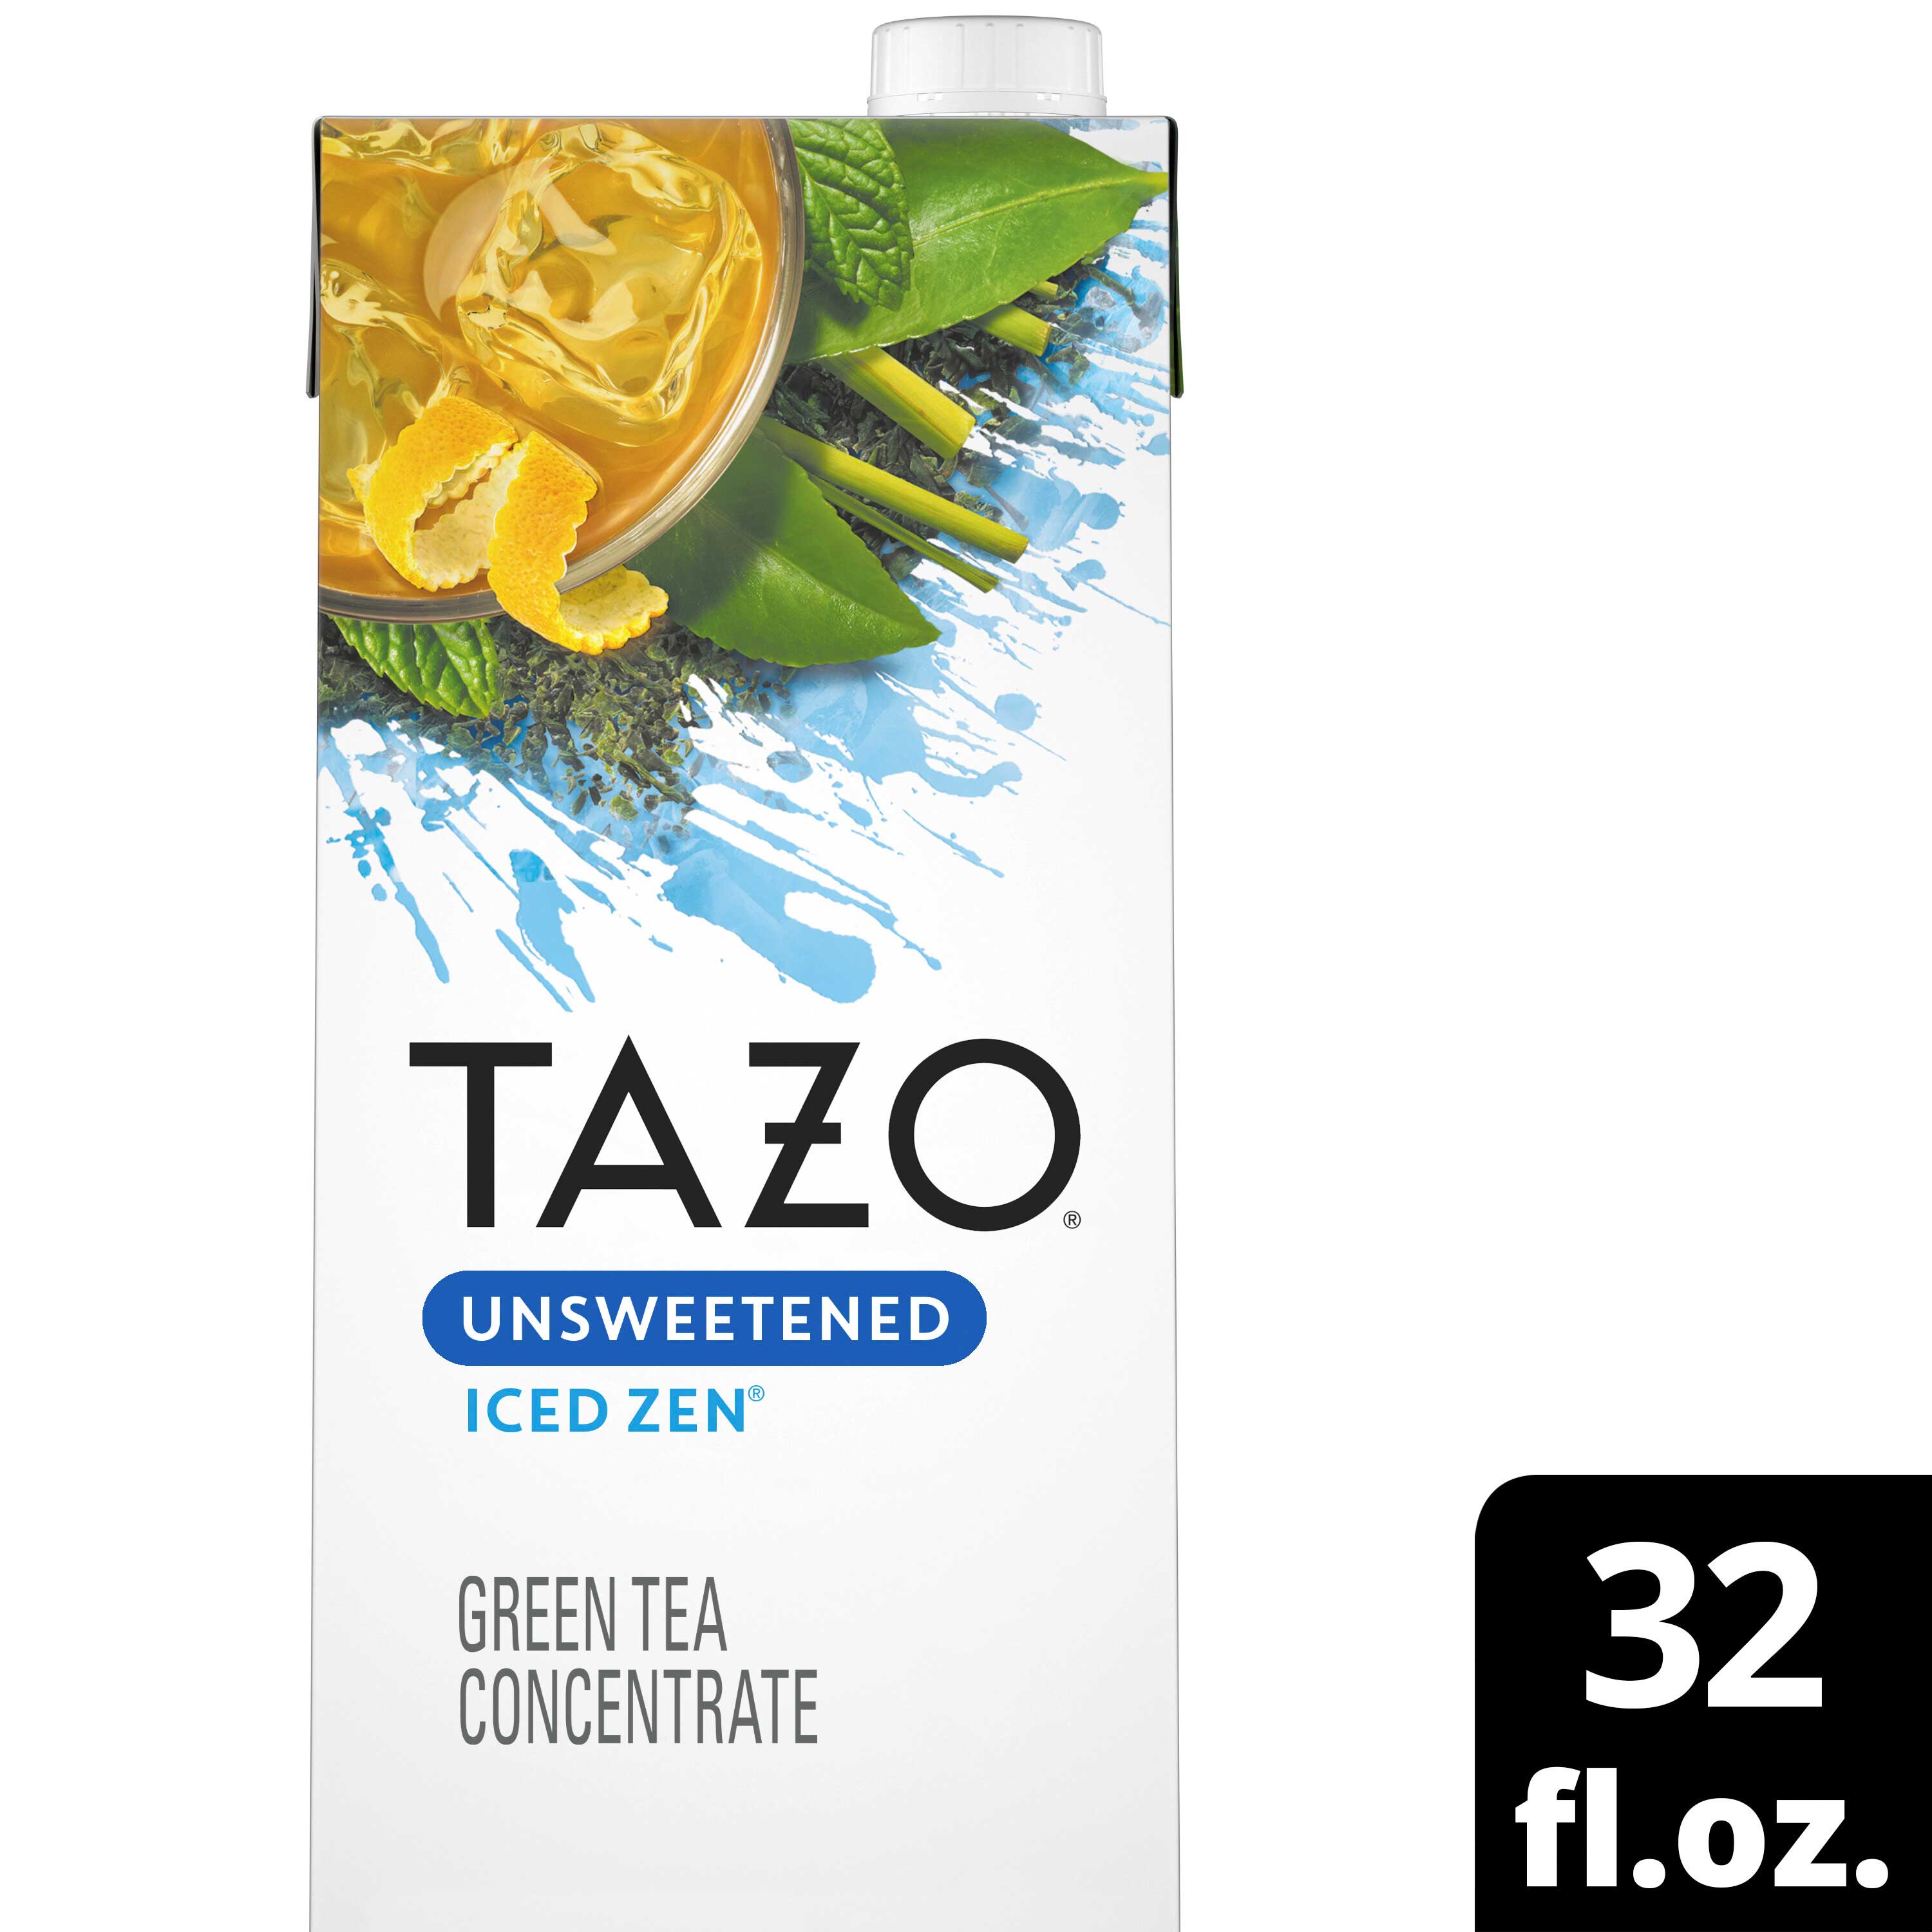 Tazo Zen Unsweetened Iced Green Tea Concentrate, 32 Ounce -- 6 per case